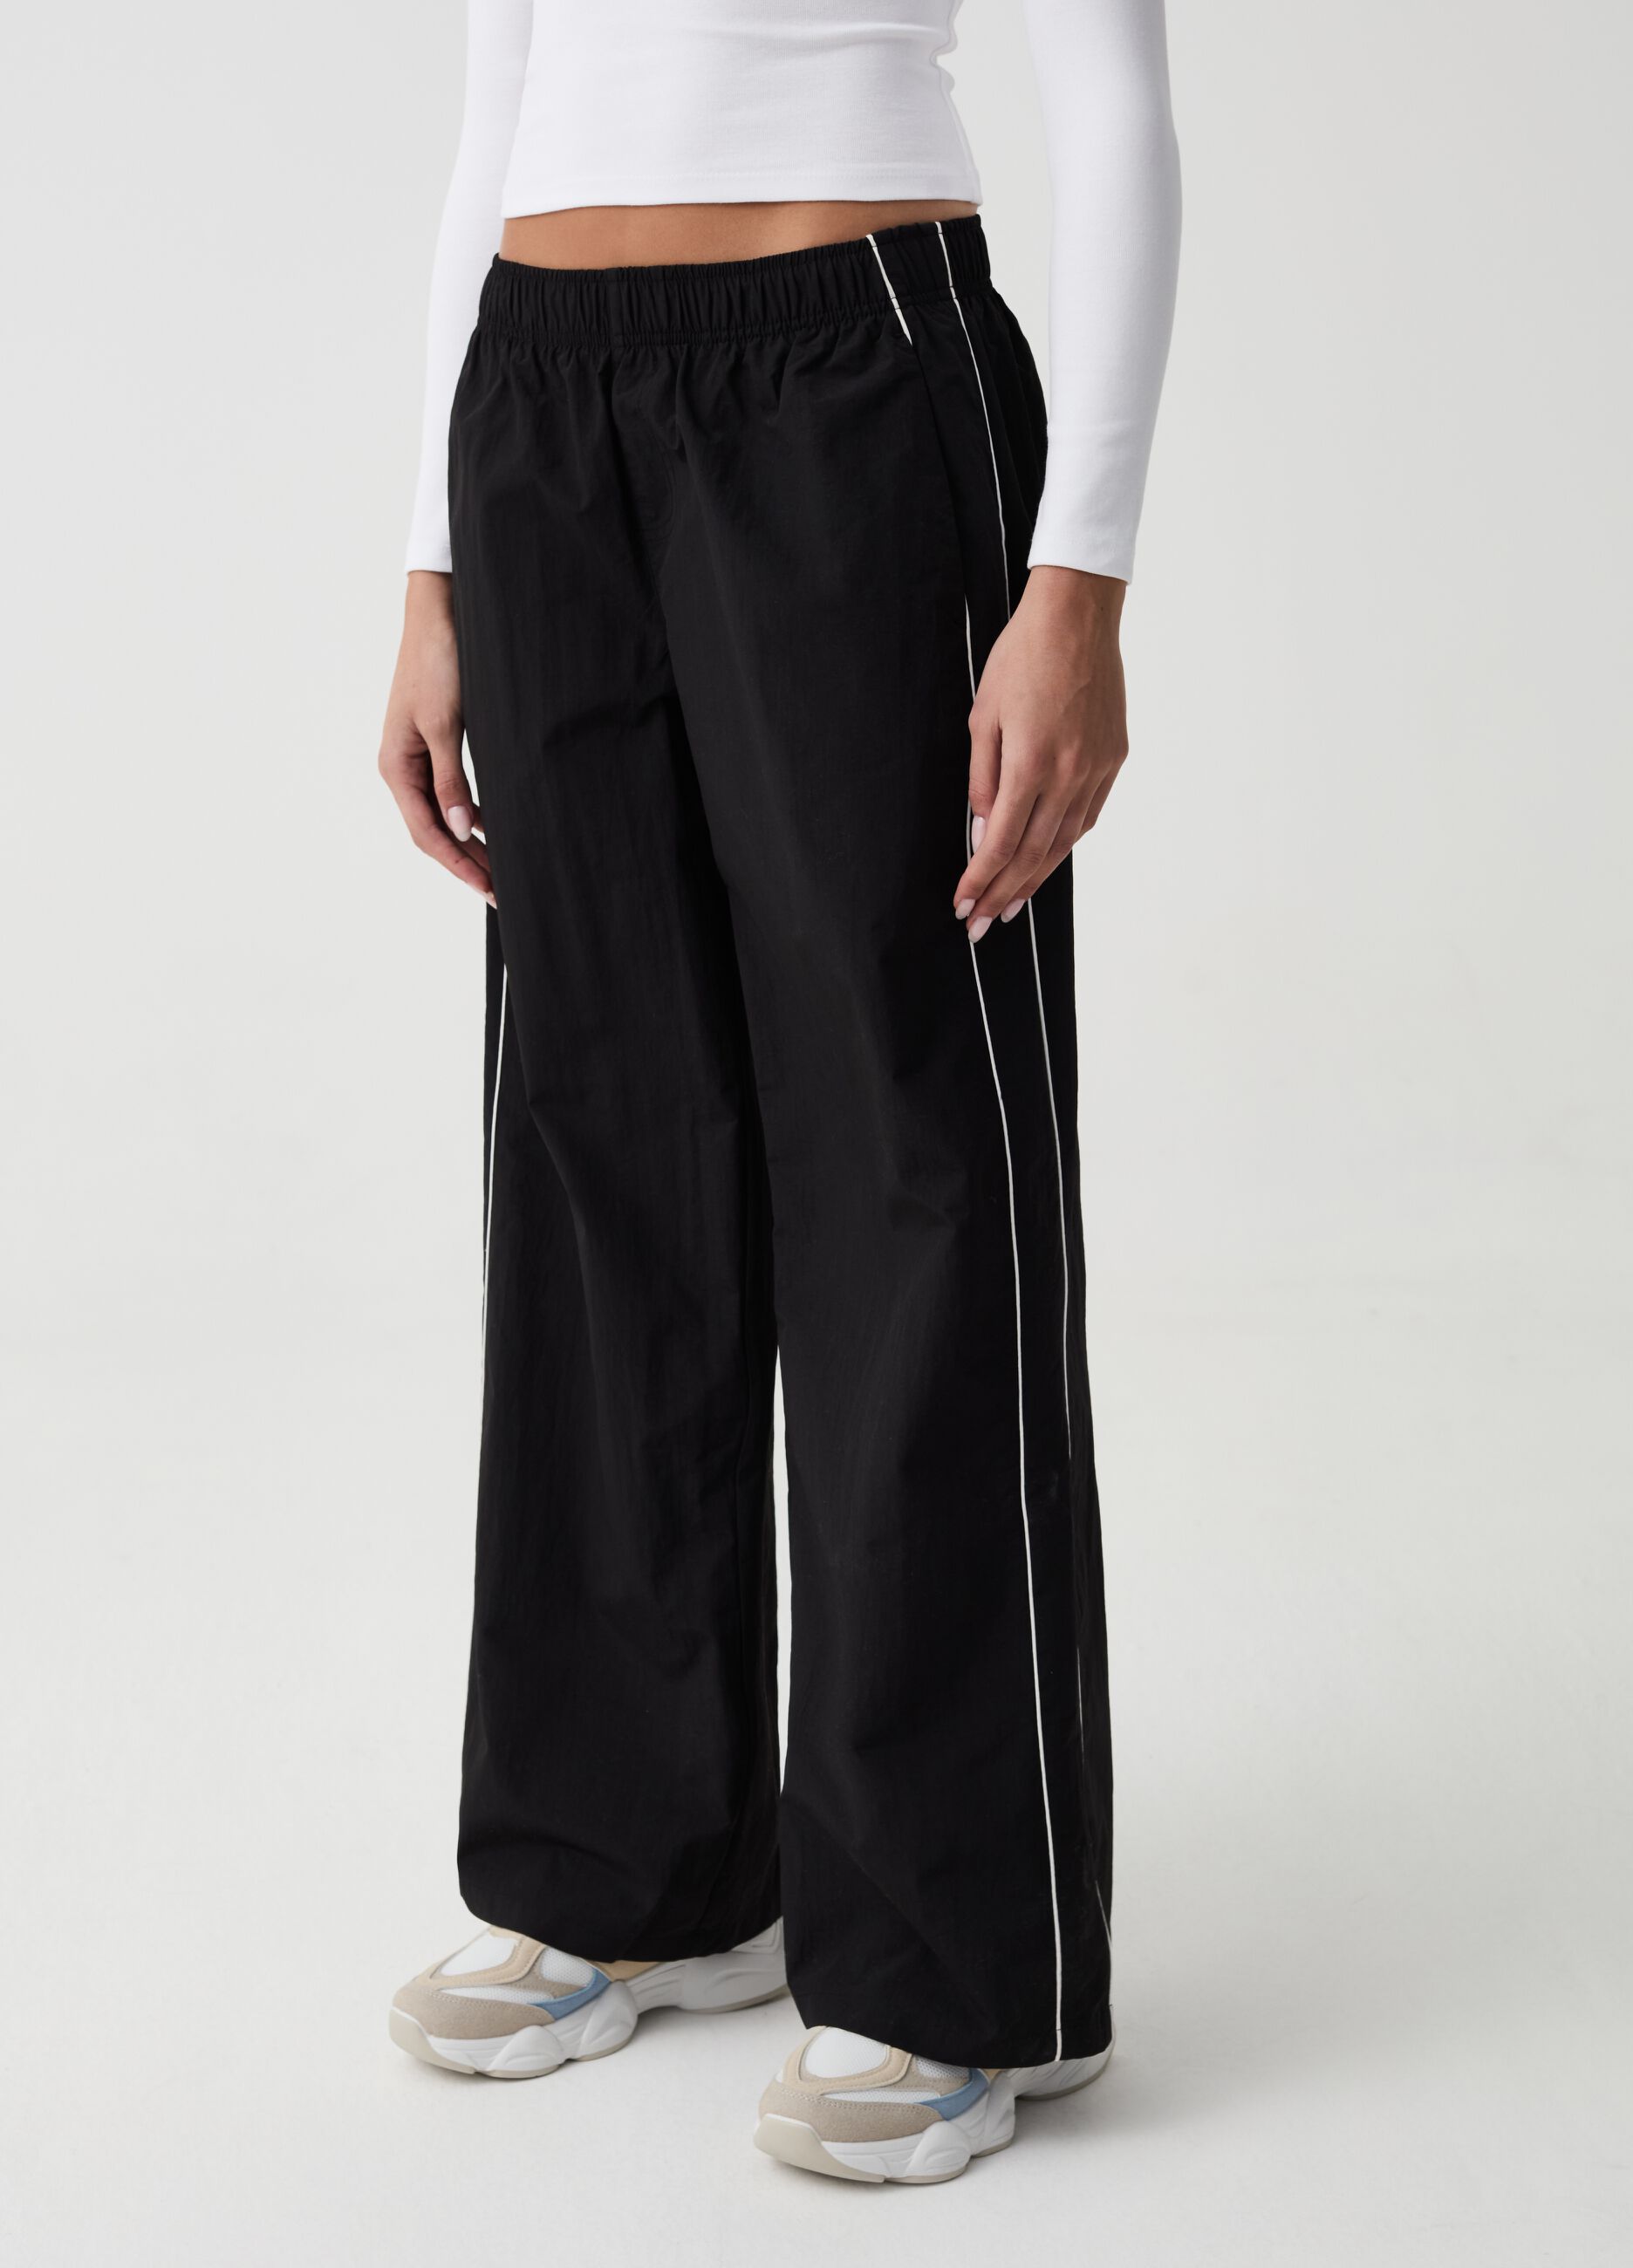 B.ANGEL FOR THE SEA BEYOND wide-leg joggers with contrasting piping